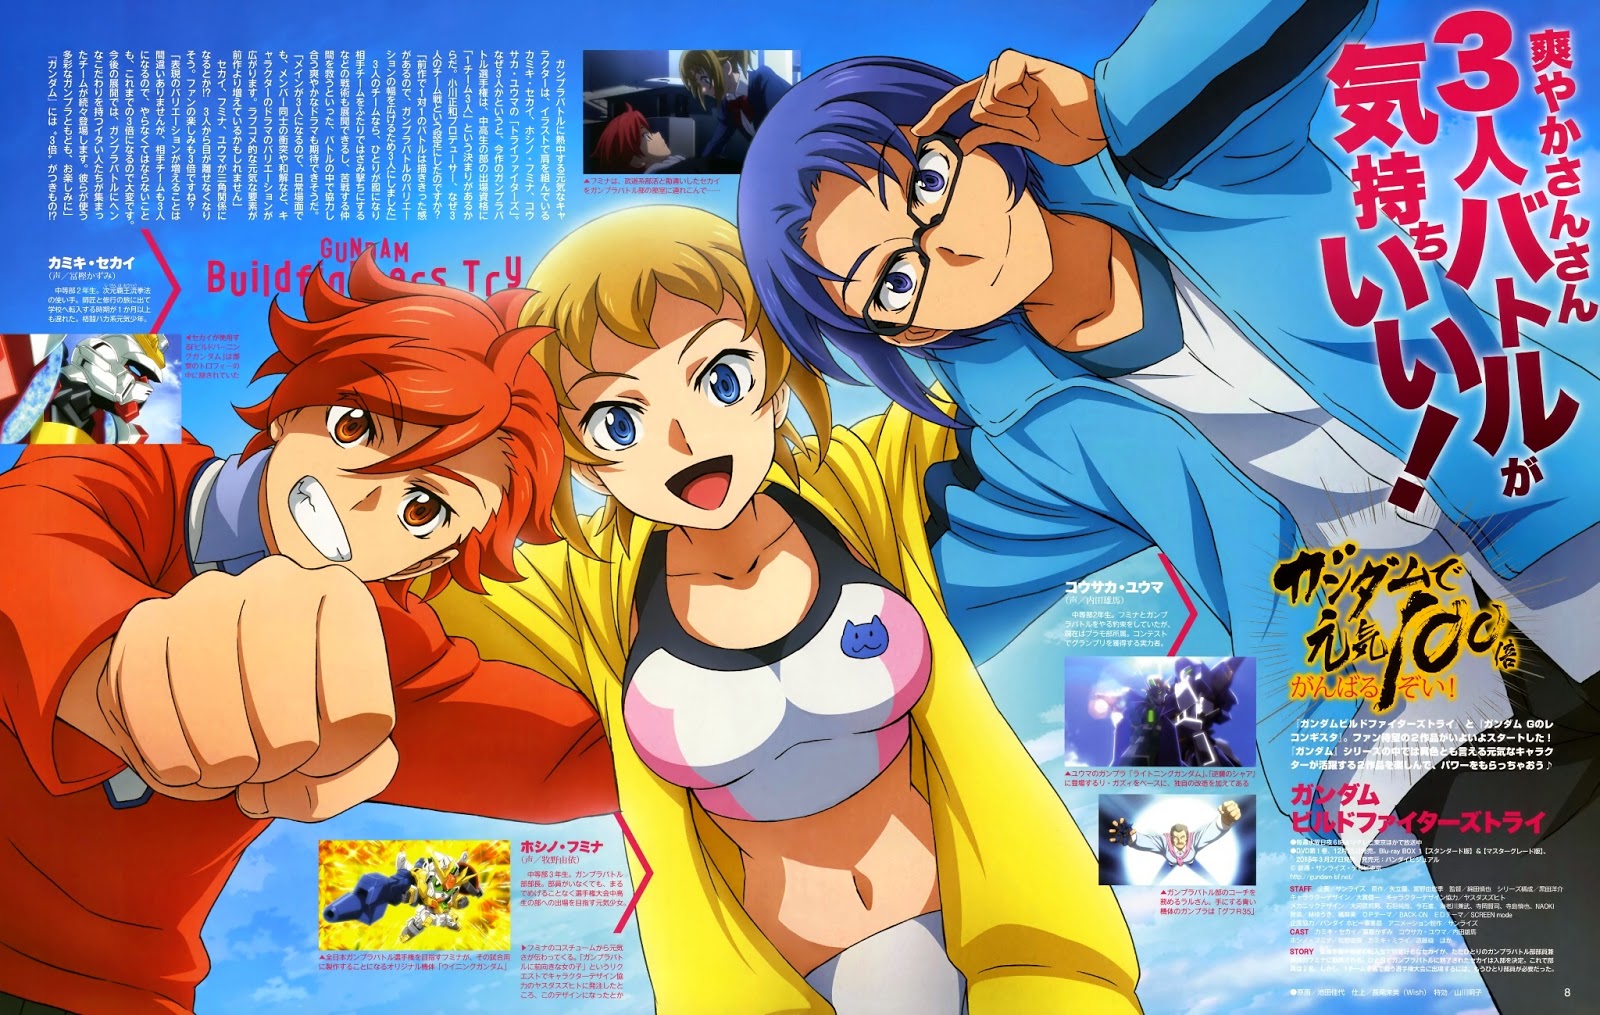 Gundam Build Fighters Try 37 Free Hd Wallpaper - Gundam Build Try Fighters , HD Wallpaper & Backgrounds